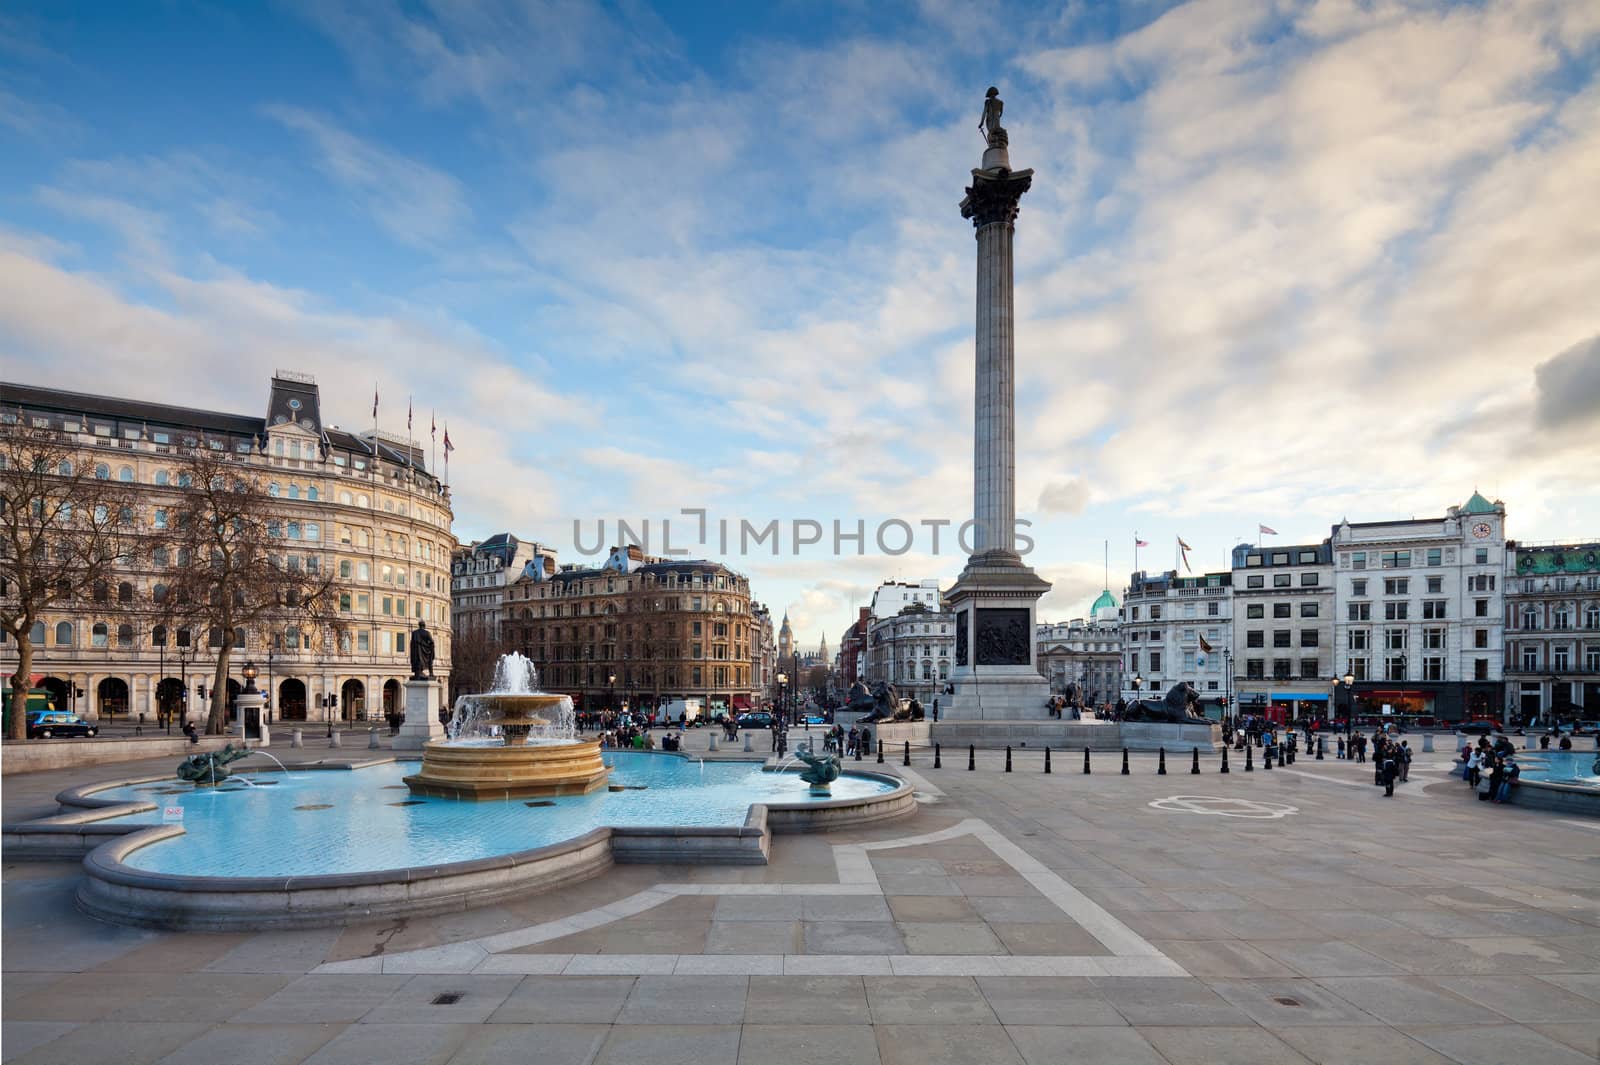 Trafalgar Square and Nelson's Column in the evening by Antartis